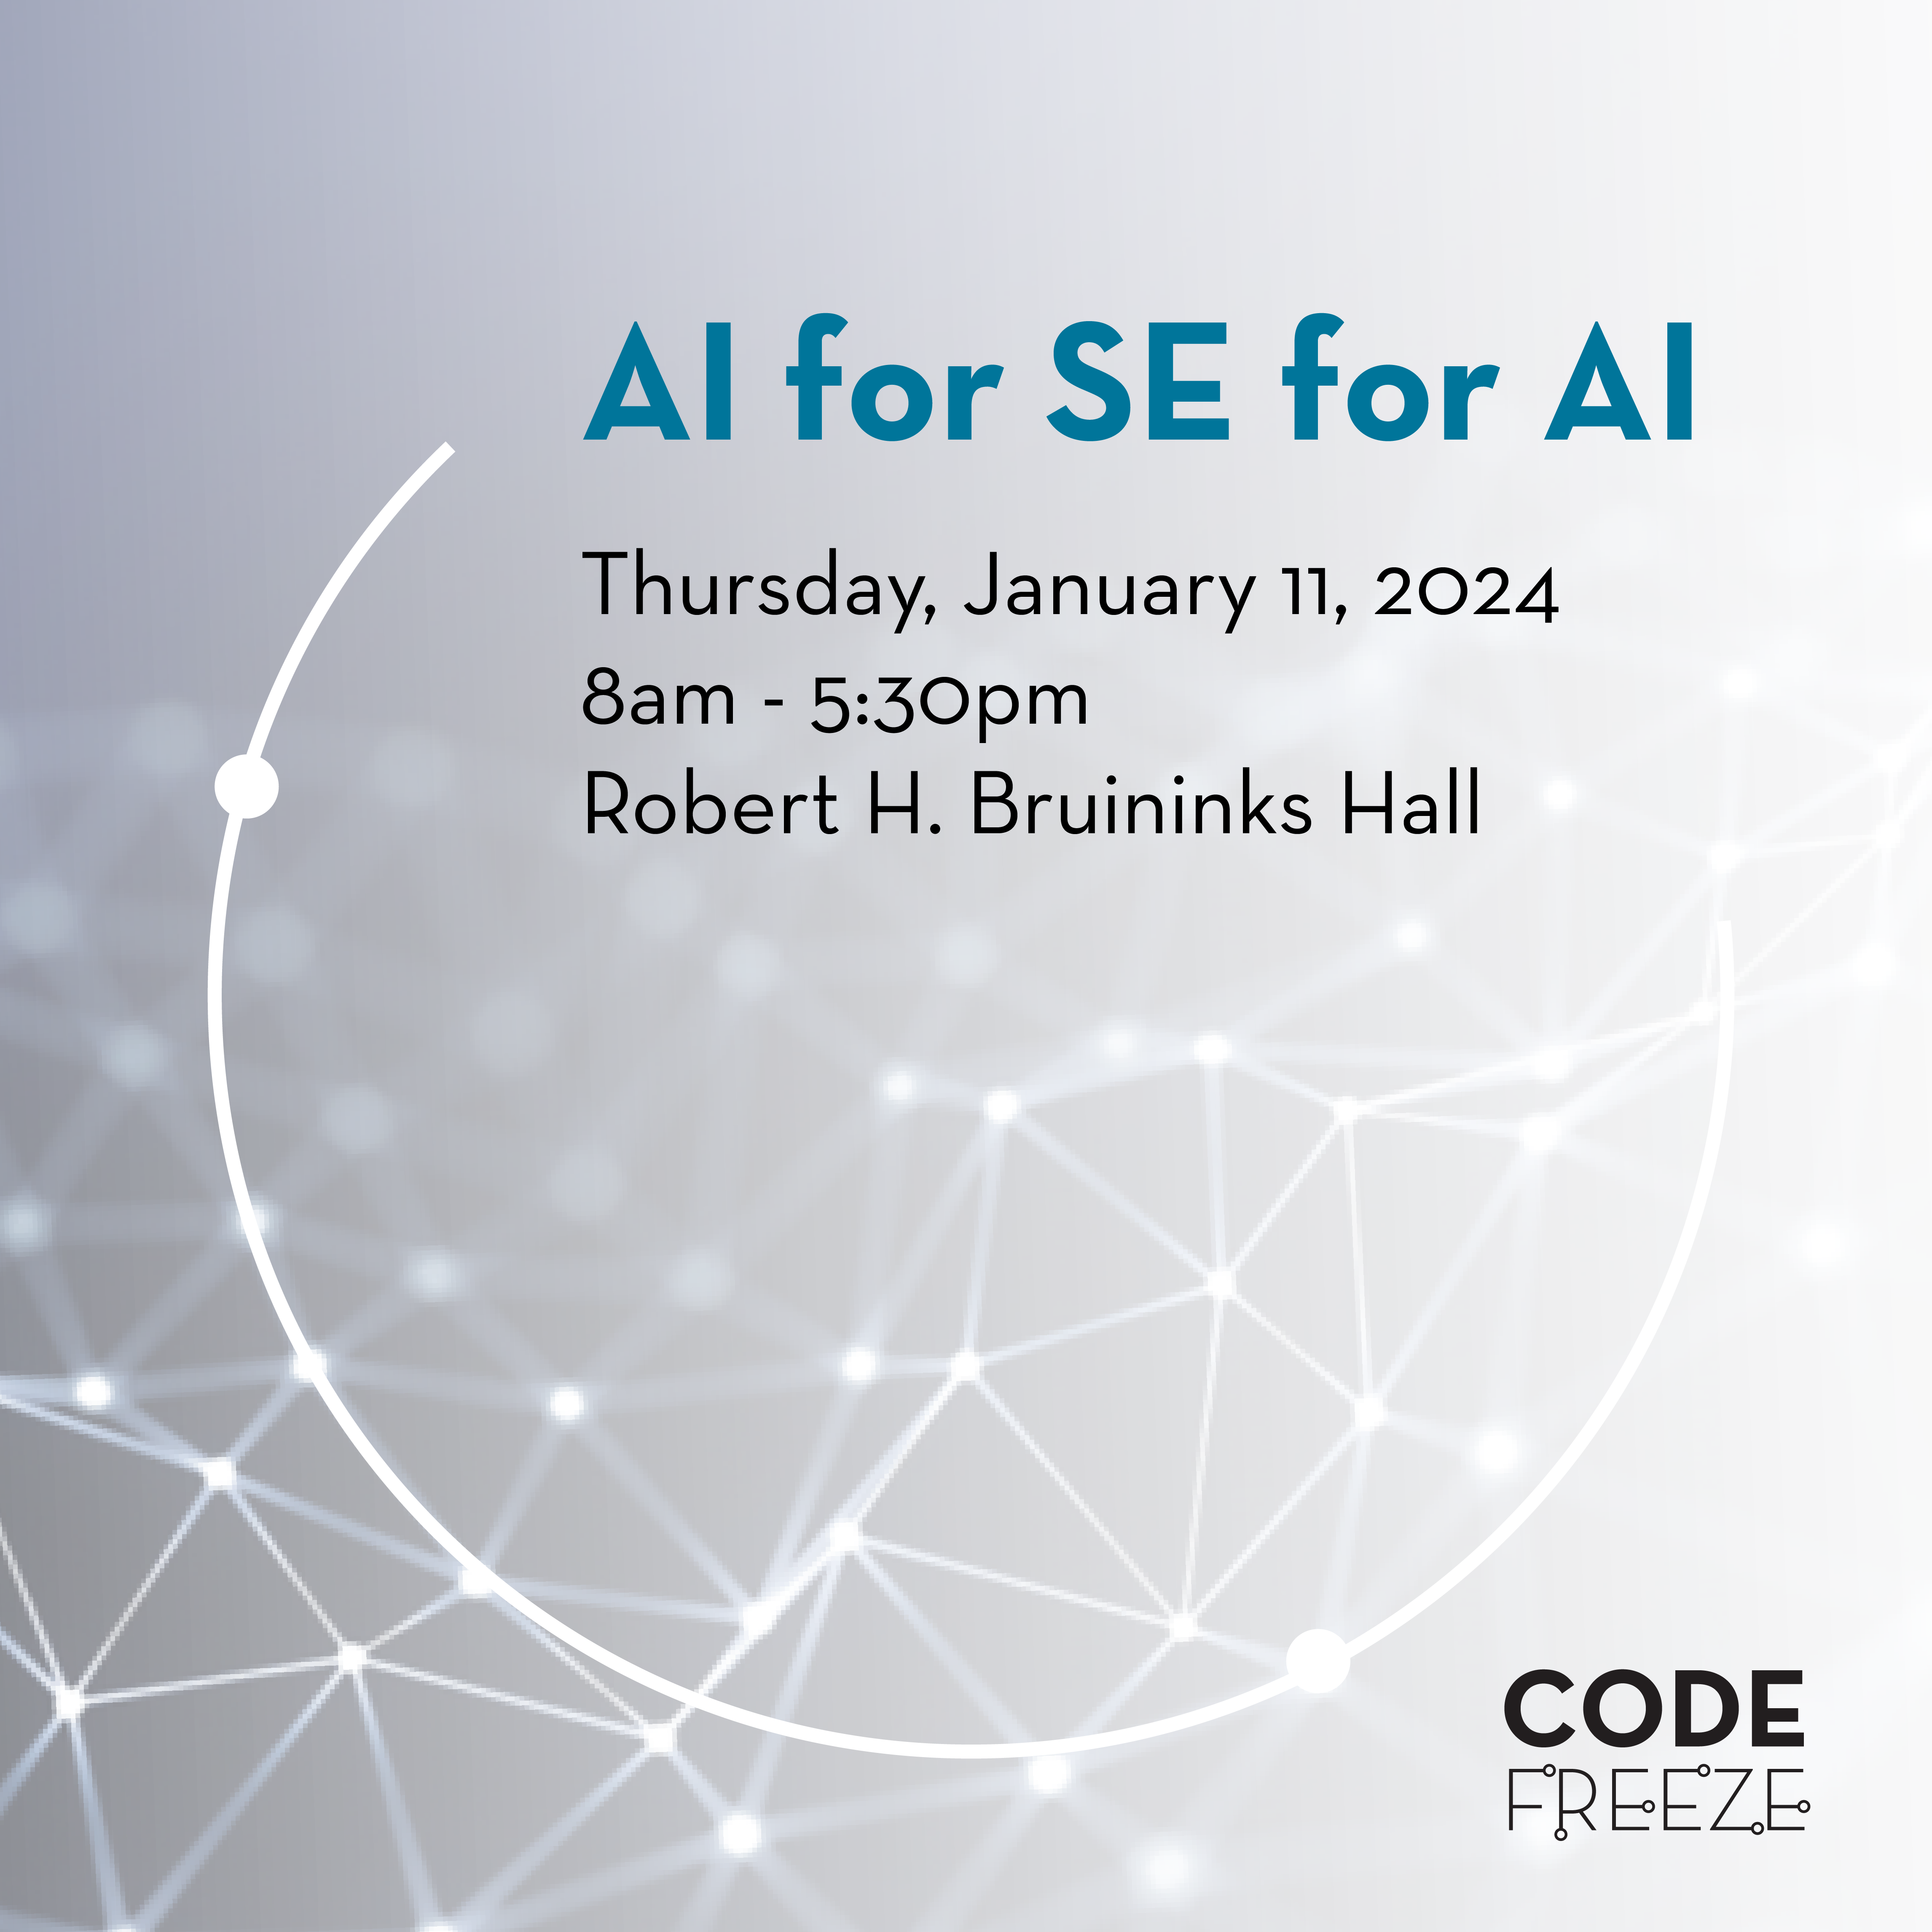 Code Freeze 2024 AI for SE for AI CHARLES BABBAGE INSTITUTE